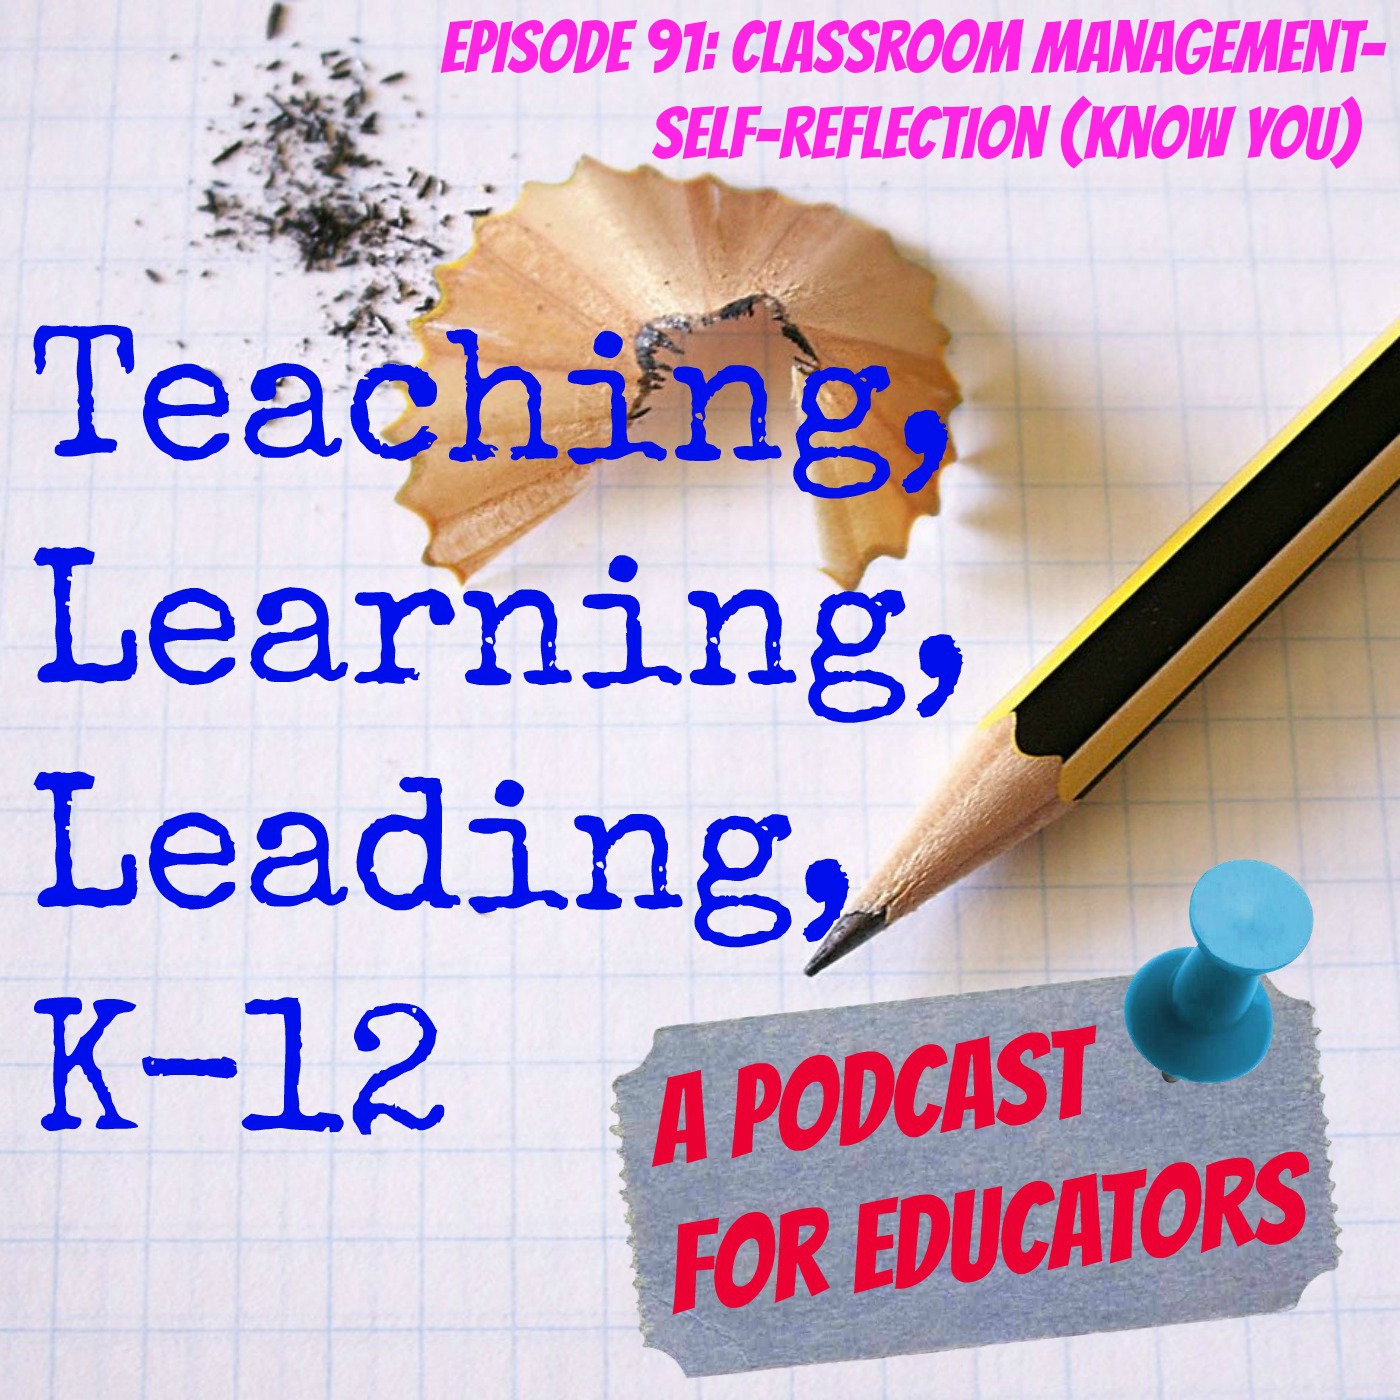 Episode 91: Classroom Management - Self-reflection (Know You)